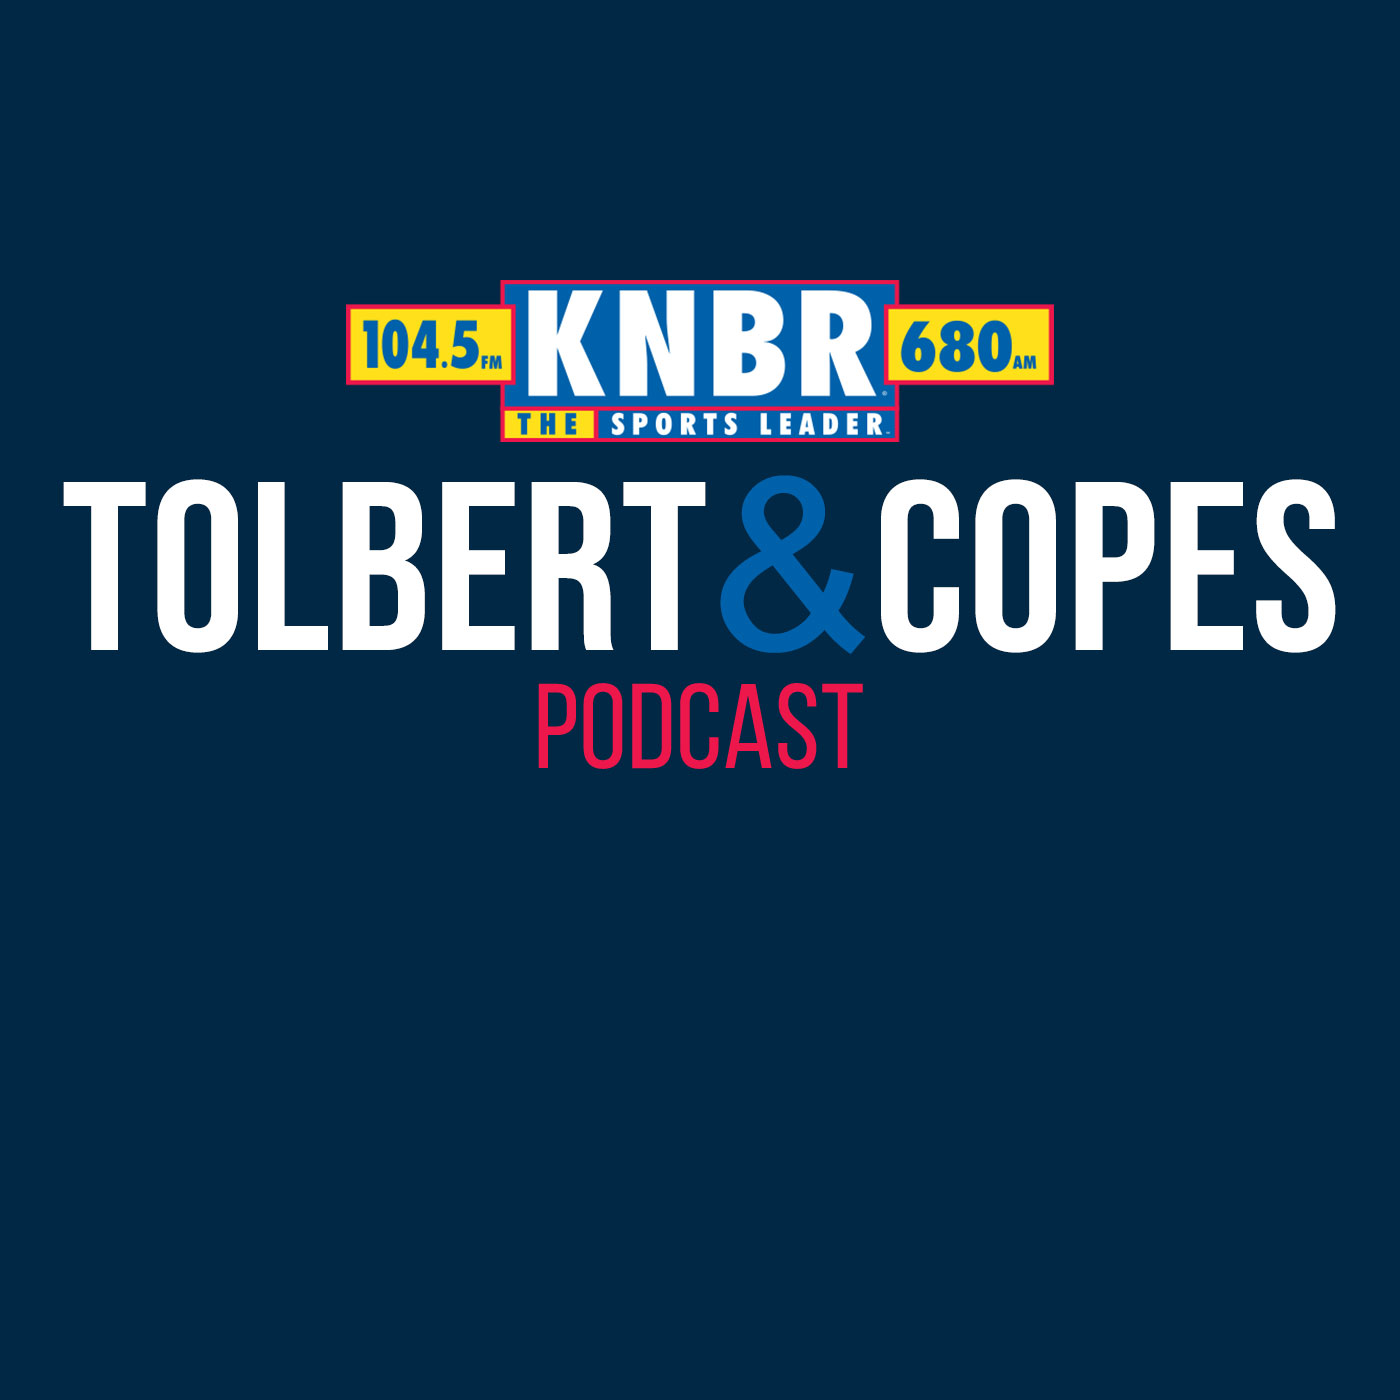 3-30 Susan Slusser tells Tom Tolbert and Adam Copeland that she expects the Giants to add at least one more player before the start of the regular season